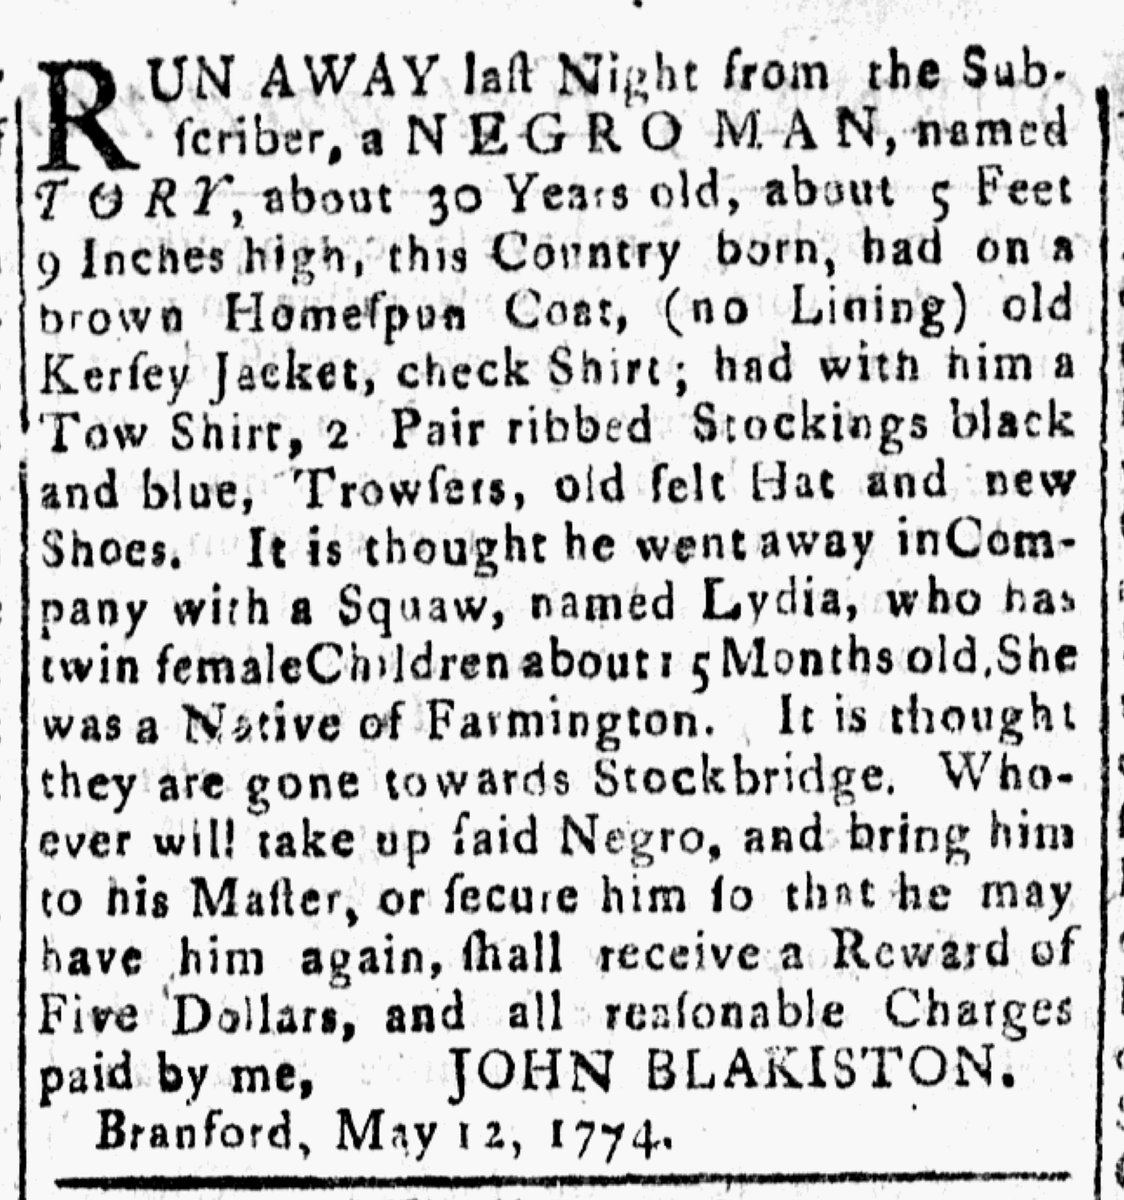 Newspapers published during the era of the American Revolution contributed to the perpetuation of slavery. Advertised 250 years ago today: “RUN AWAY ... a NEGRO MAN, named TORY ... in company with [an Indian], named Lydia.” (Connecticut Journal Extraordinary 5/17/1774)